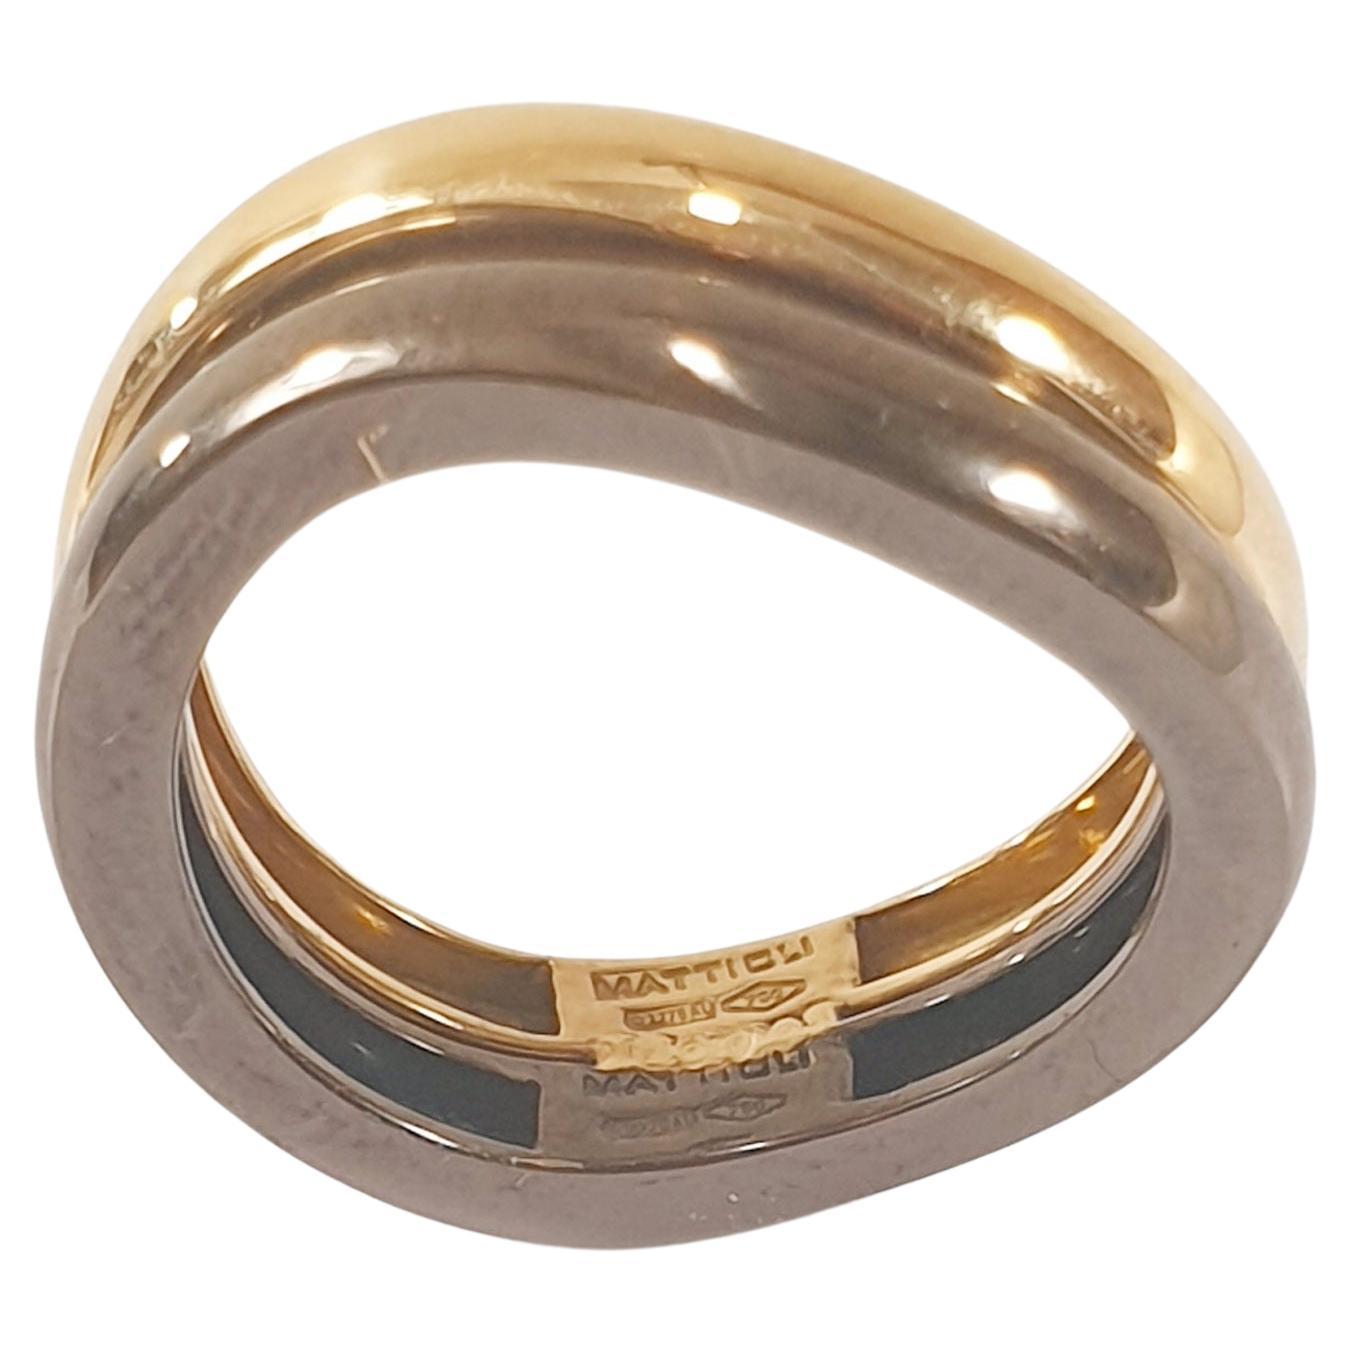 Mattioli Aspis Collection Band Engament Ring Black and Yellow 18 Karat Gold For Sale